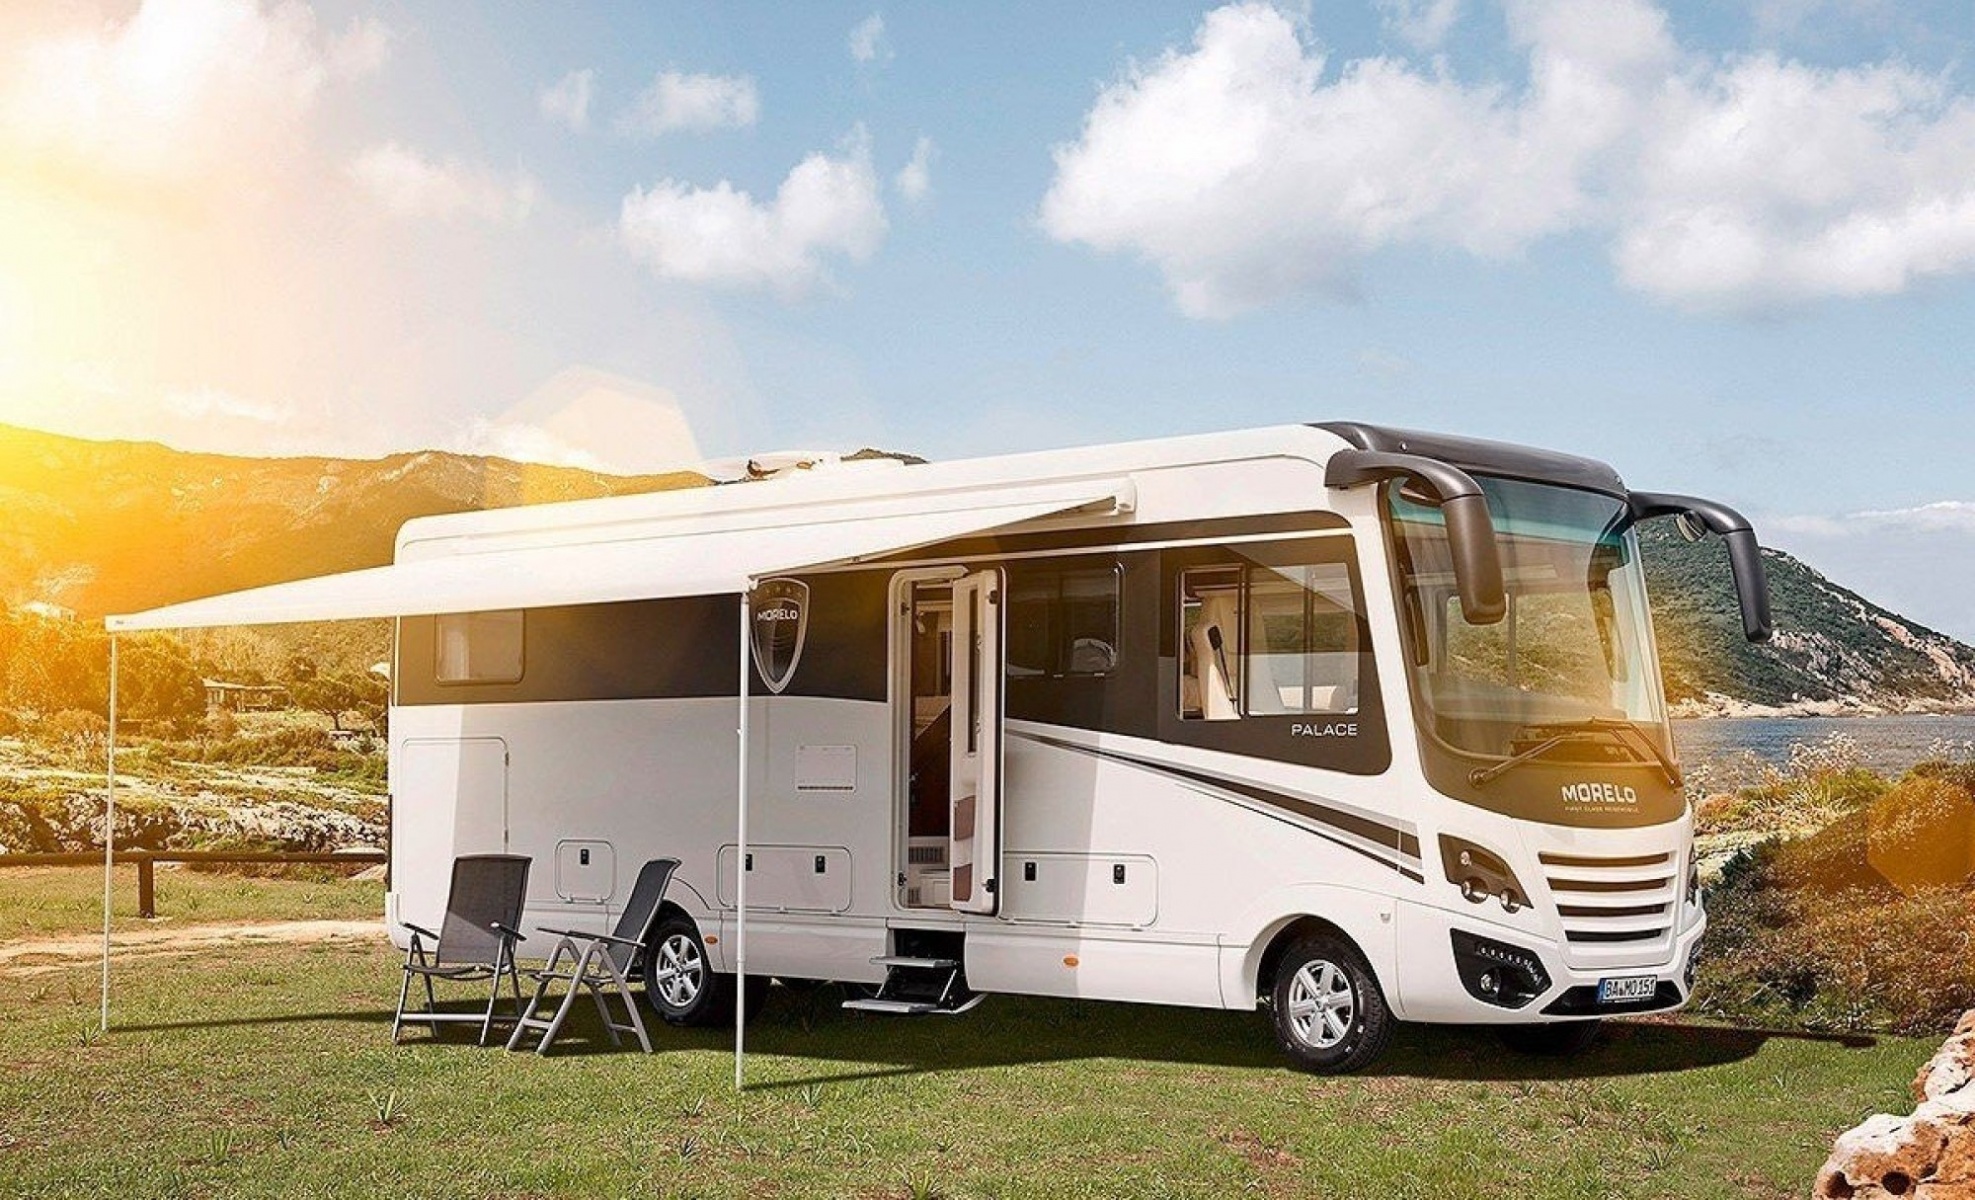 Ranking of the best motorhomes for 2020